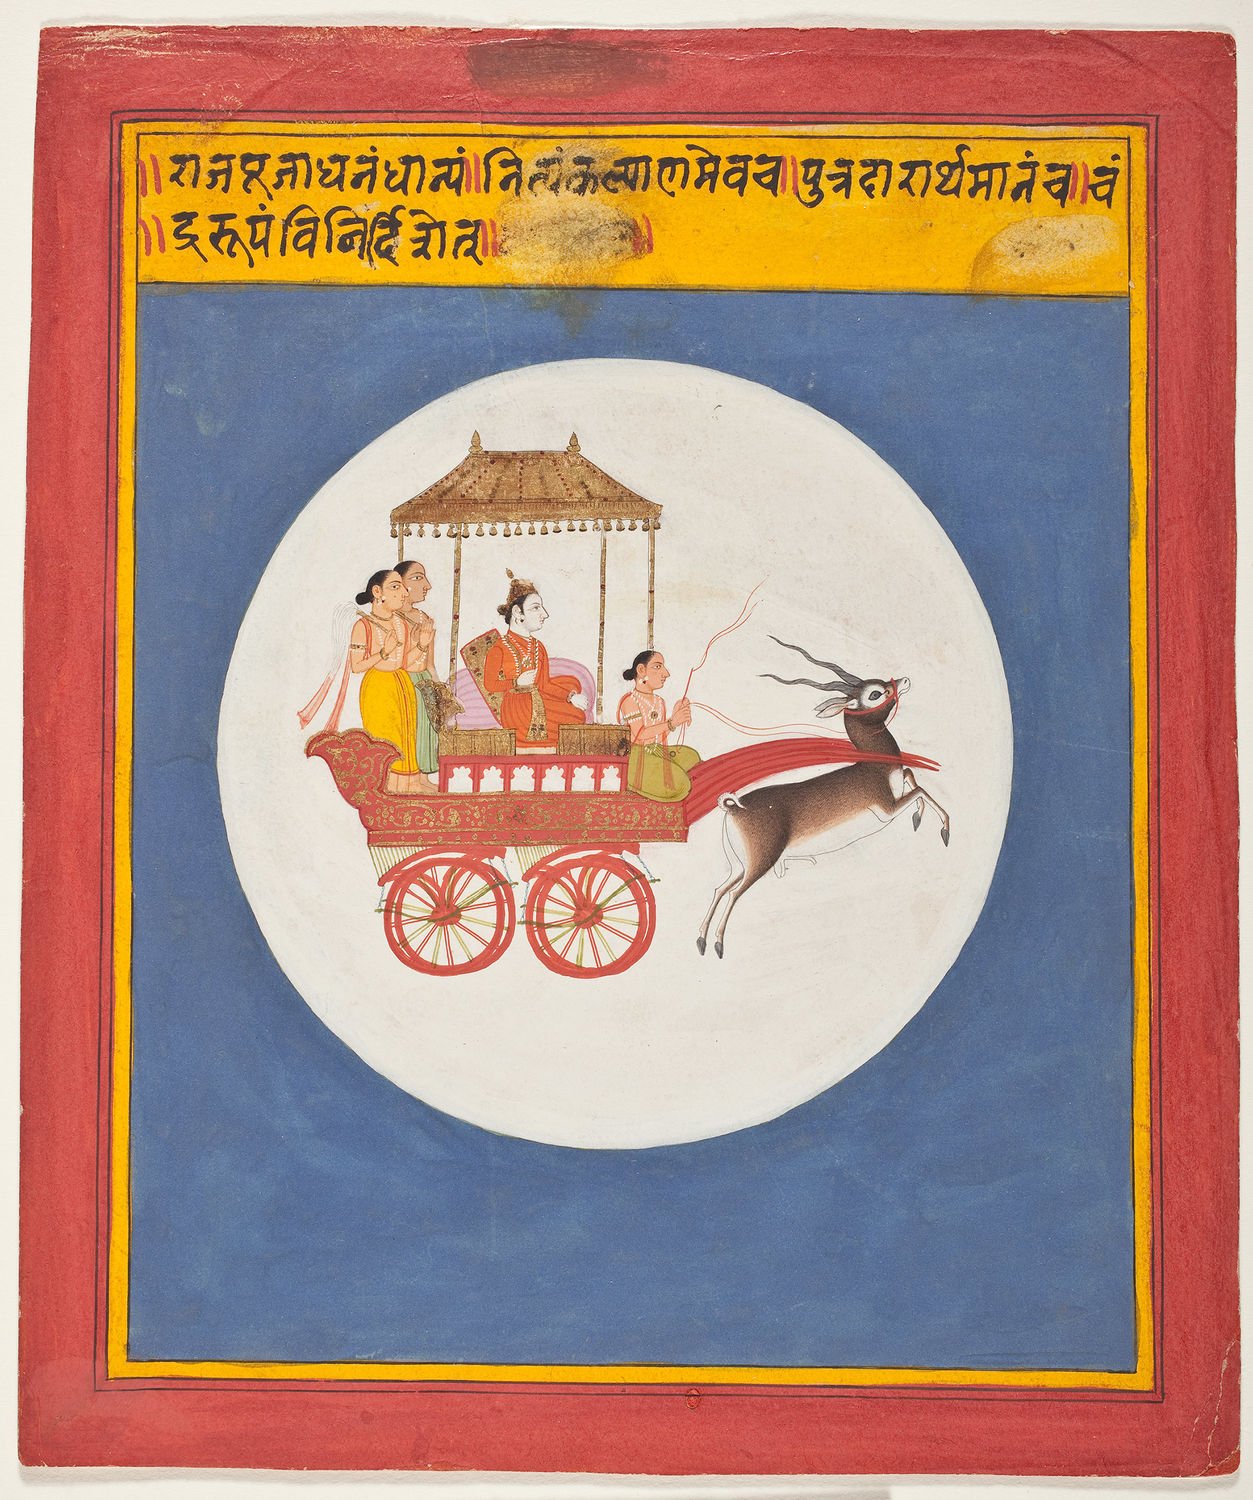  Unknown maker, India, Rajasthan, Mewar, Udaipur, Chandra, the Moon God; Folio from a Book of Dreams, 1700–1725  Opaque watercolor, gold, and ink on paper. Sheet: 10 1/8 x 8 1/2 in 